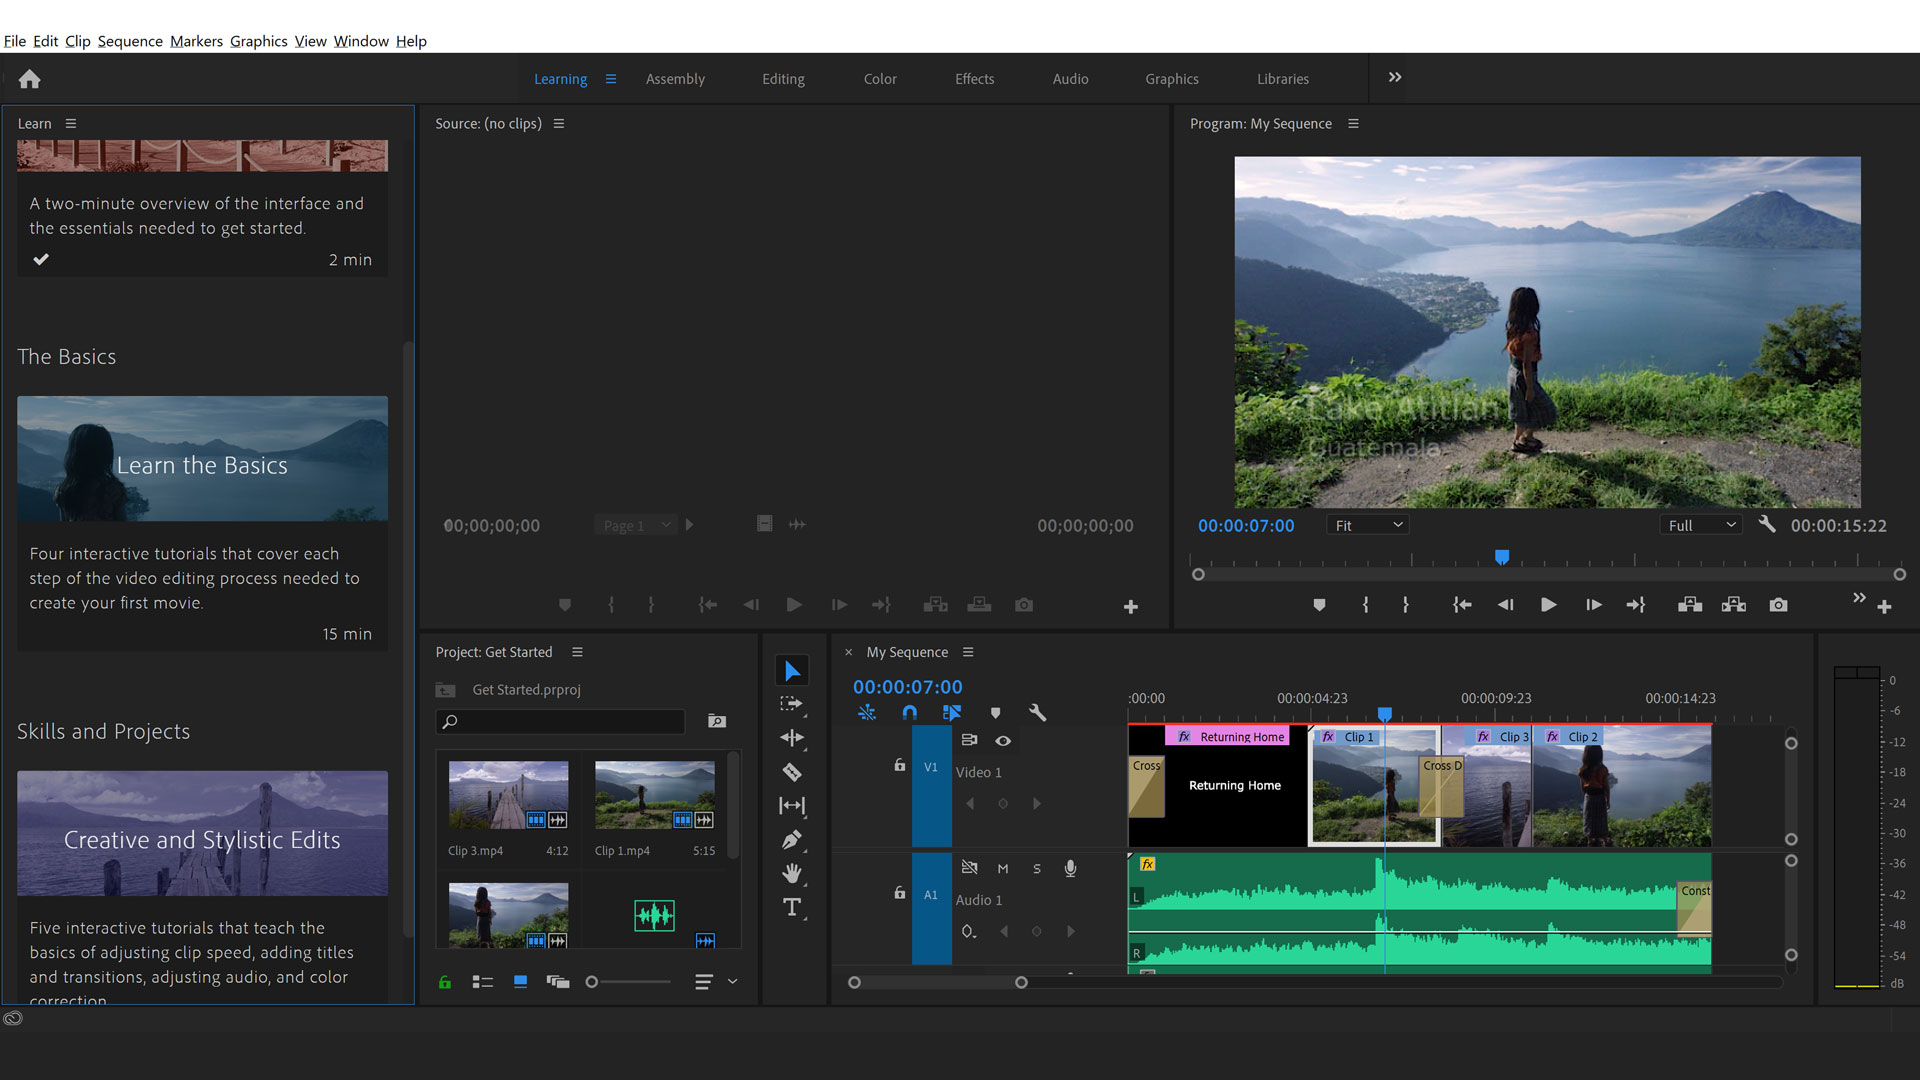 Screengrab from the interface of Adobe Premiere Pro, one of the best video editing software tools